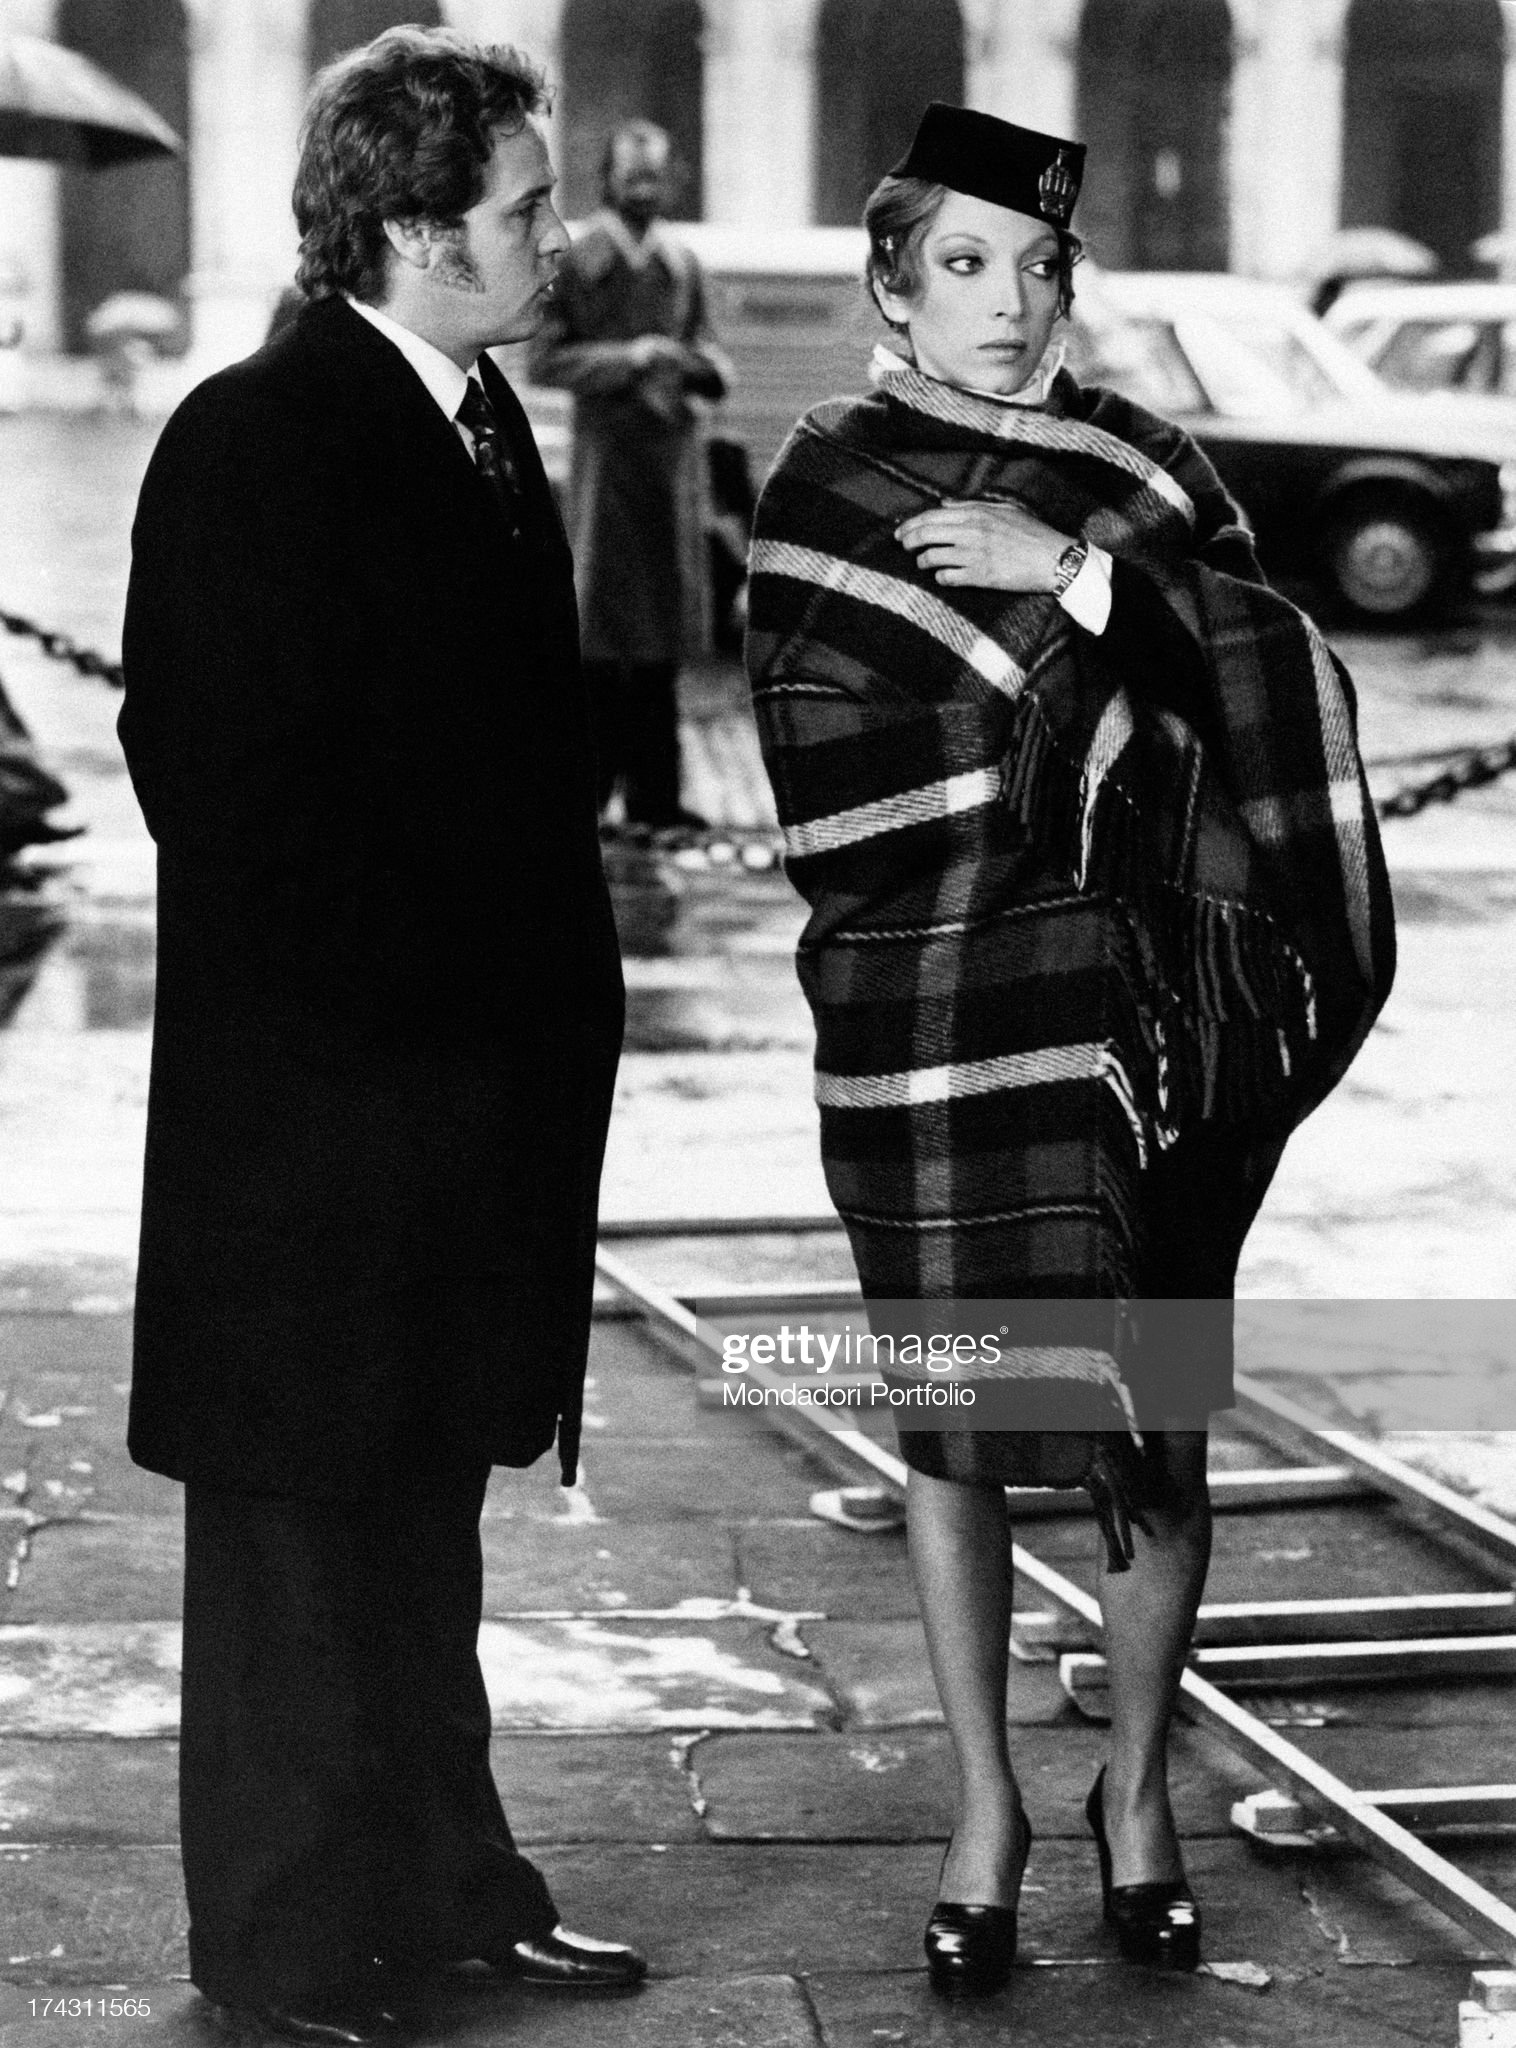 Italian actor and stand-up comedian Renato Pozzetto talking to Italian actress Mariangela Melato wrapped in a blanket on the set of the film Policewoman at Bergamo, Italy, in 1974. 